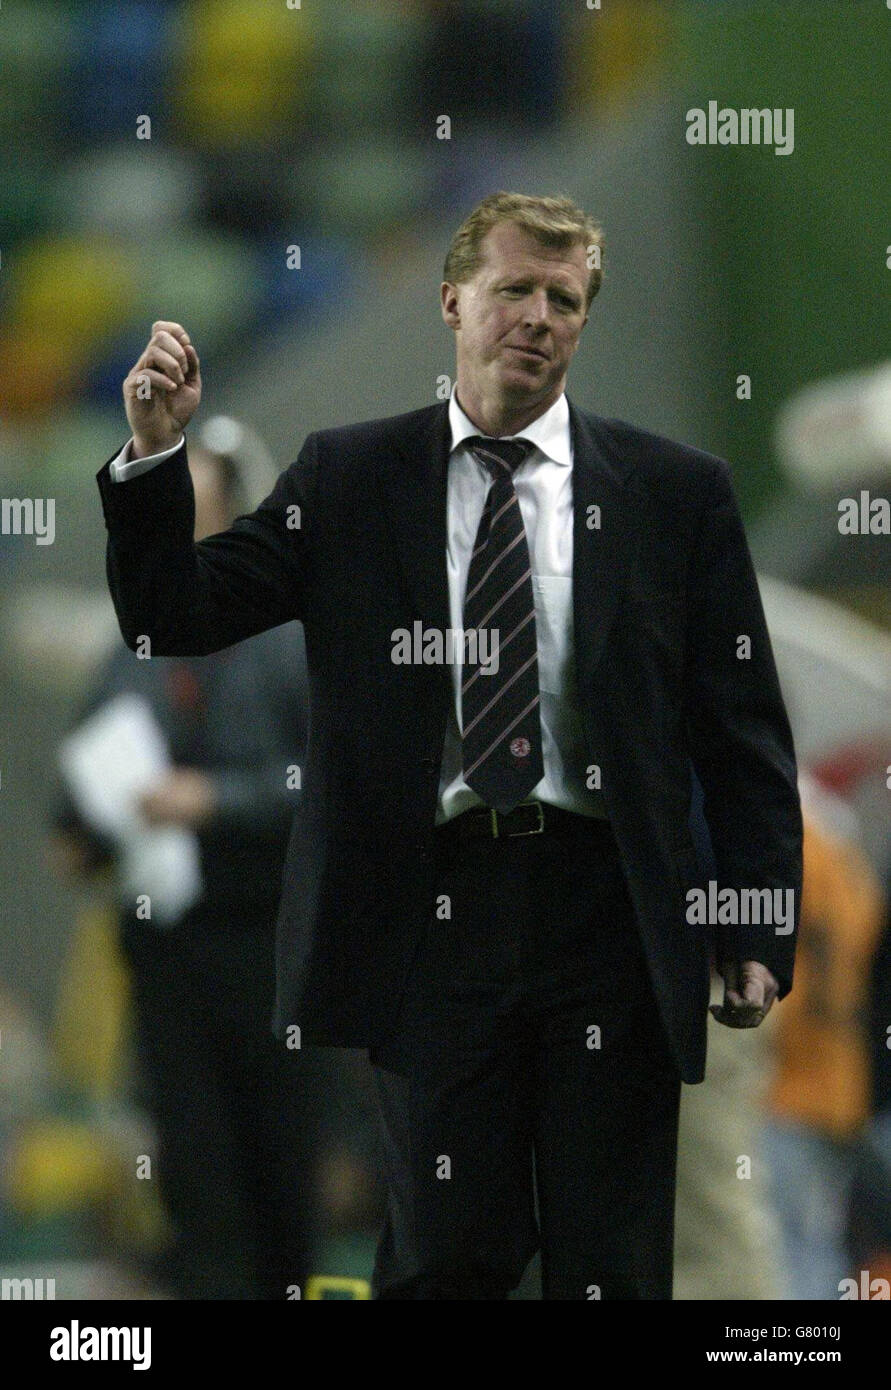 Middlesbrough manager Steve McClaren shows his dejection after Sporting Lisbon score. Stock Photo